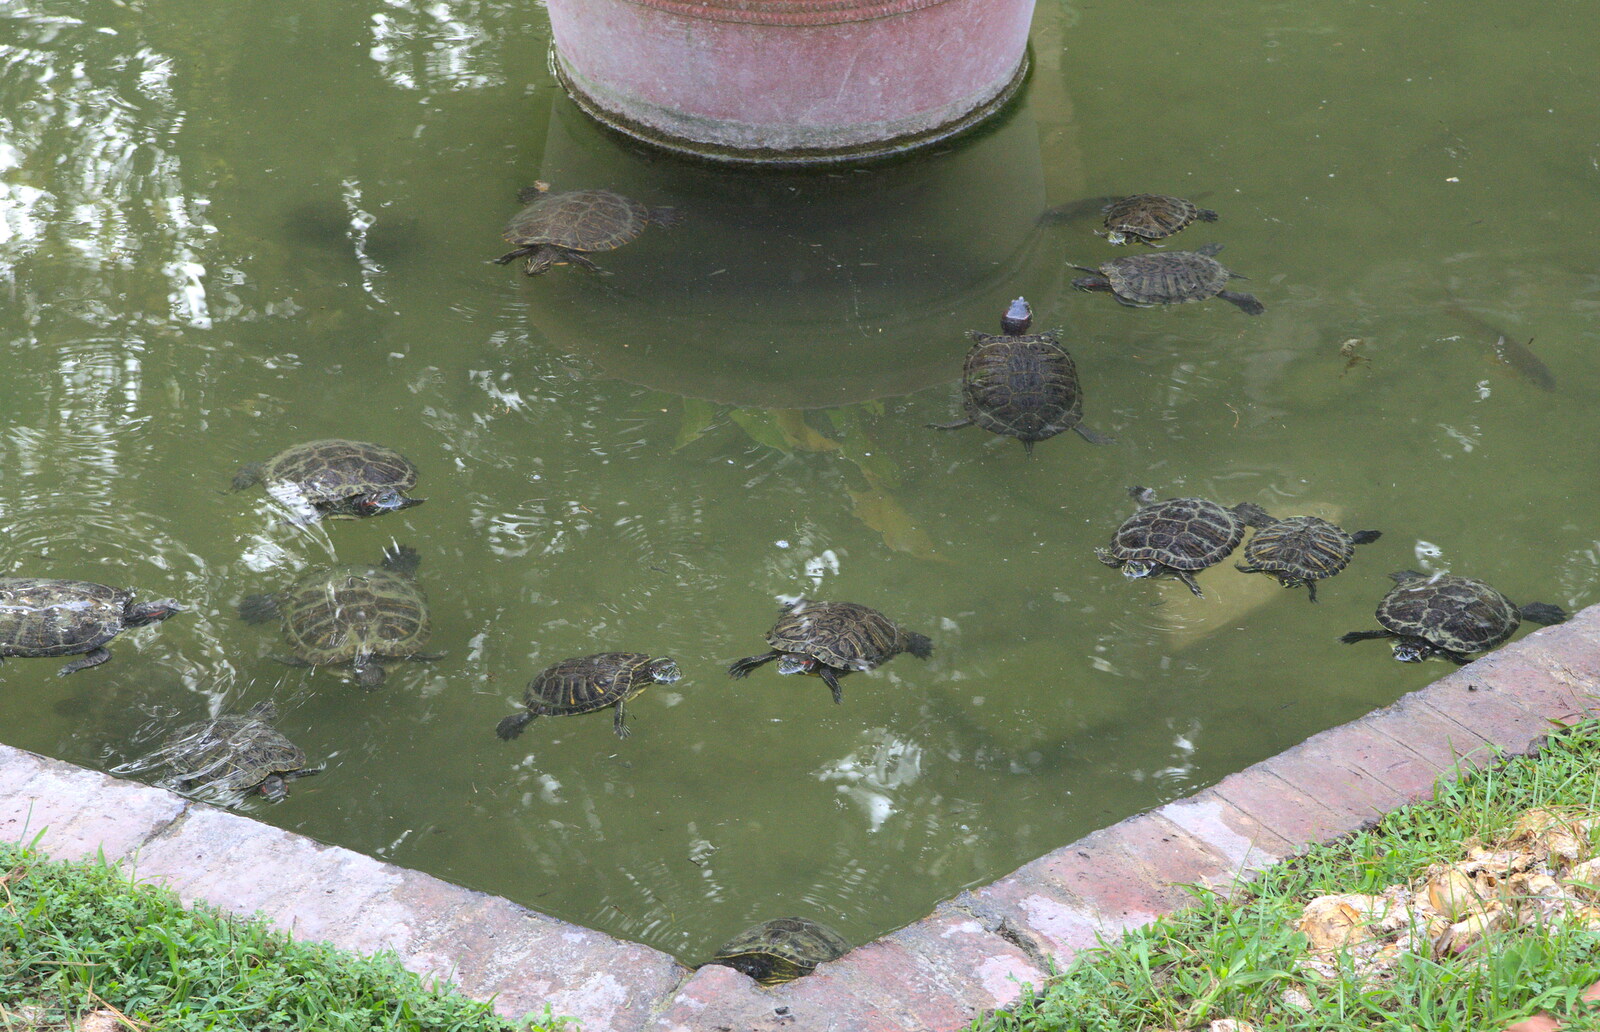 The next morning, the terrapins are out in force from The Open Education Challenge, Barcelona, Catalonia - 13th July 2014